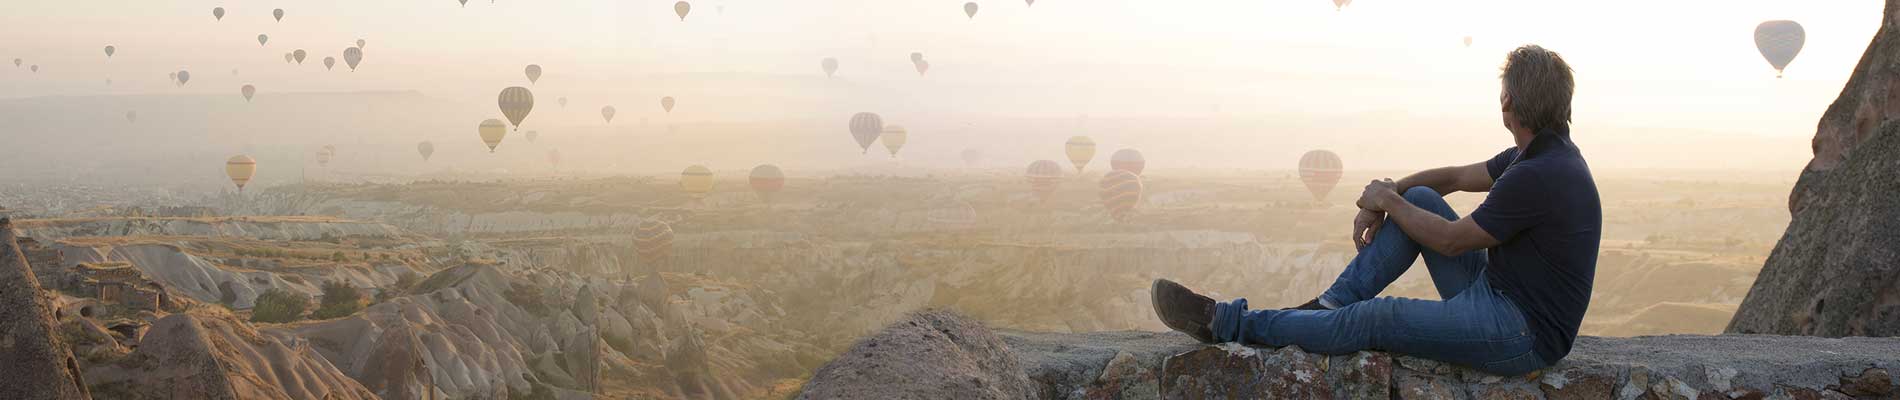 A man sitting on a rock plateau watching hot air balloons take to flight